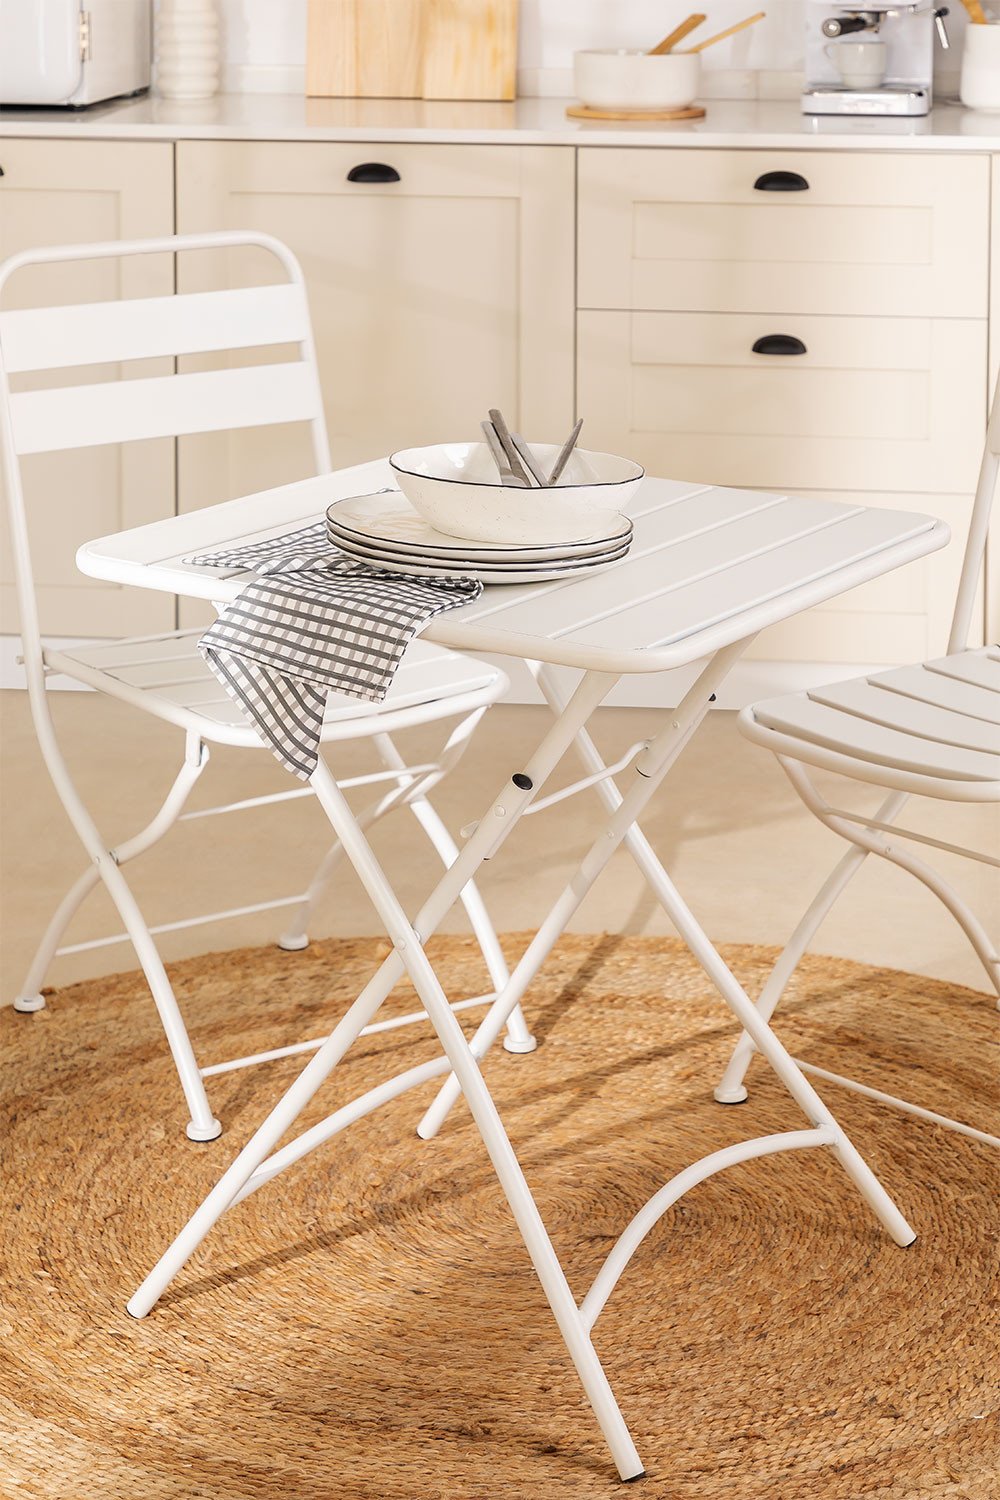 Foldable Steel Table (60 x 60 cm) Janti , gallery image 1